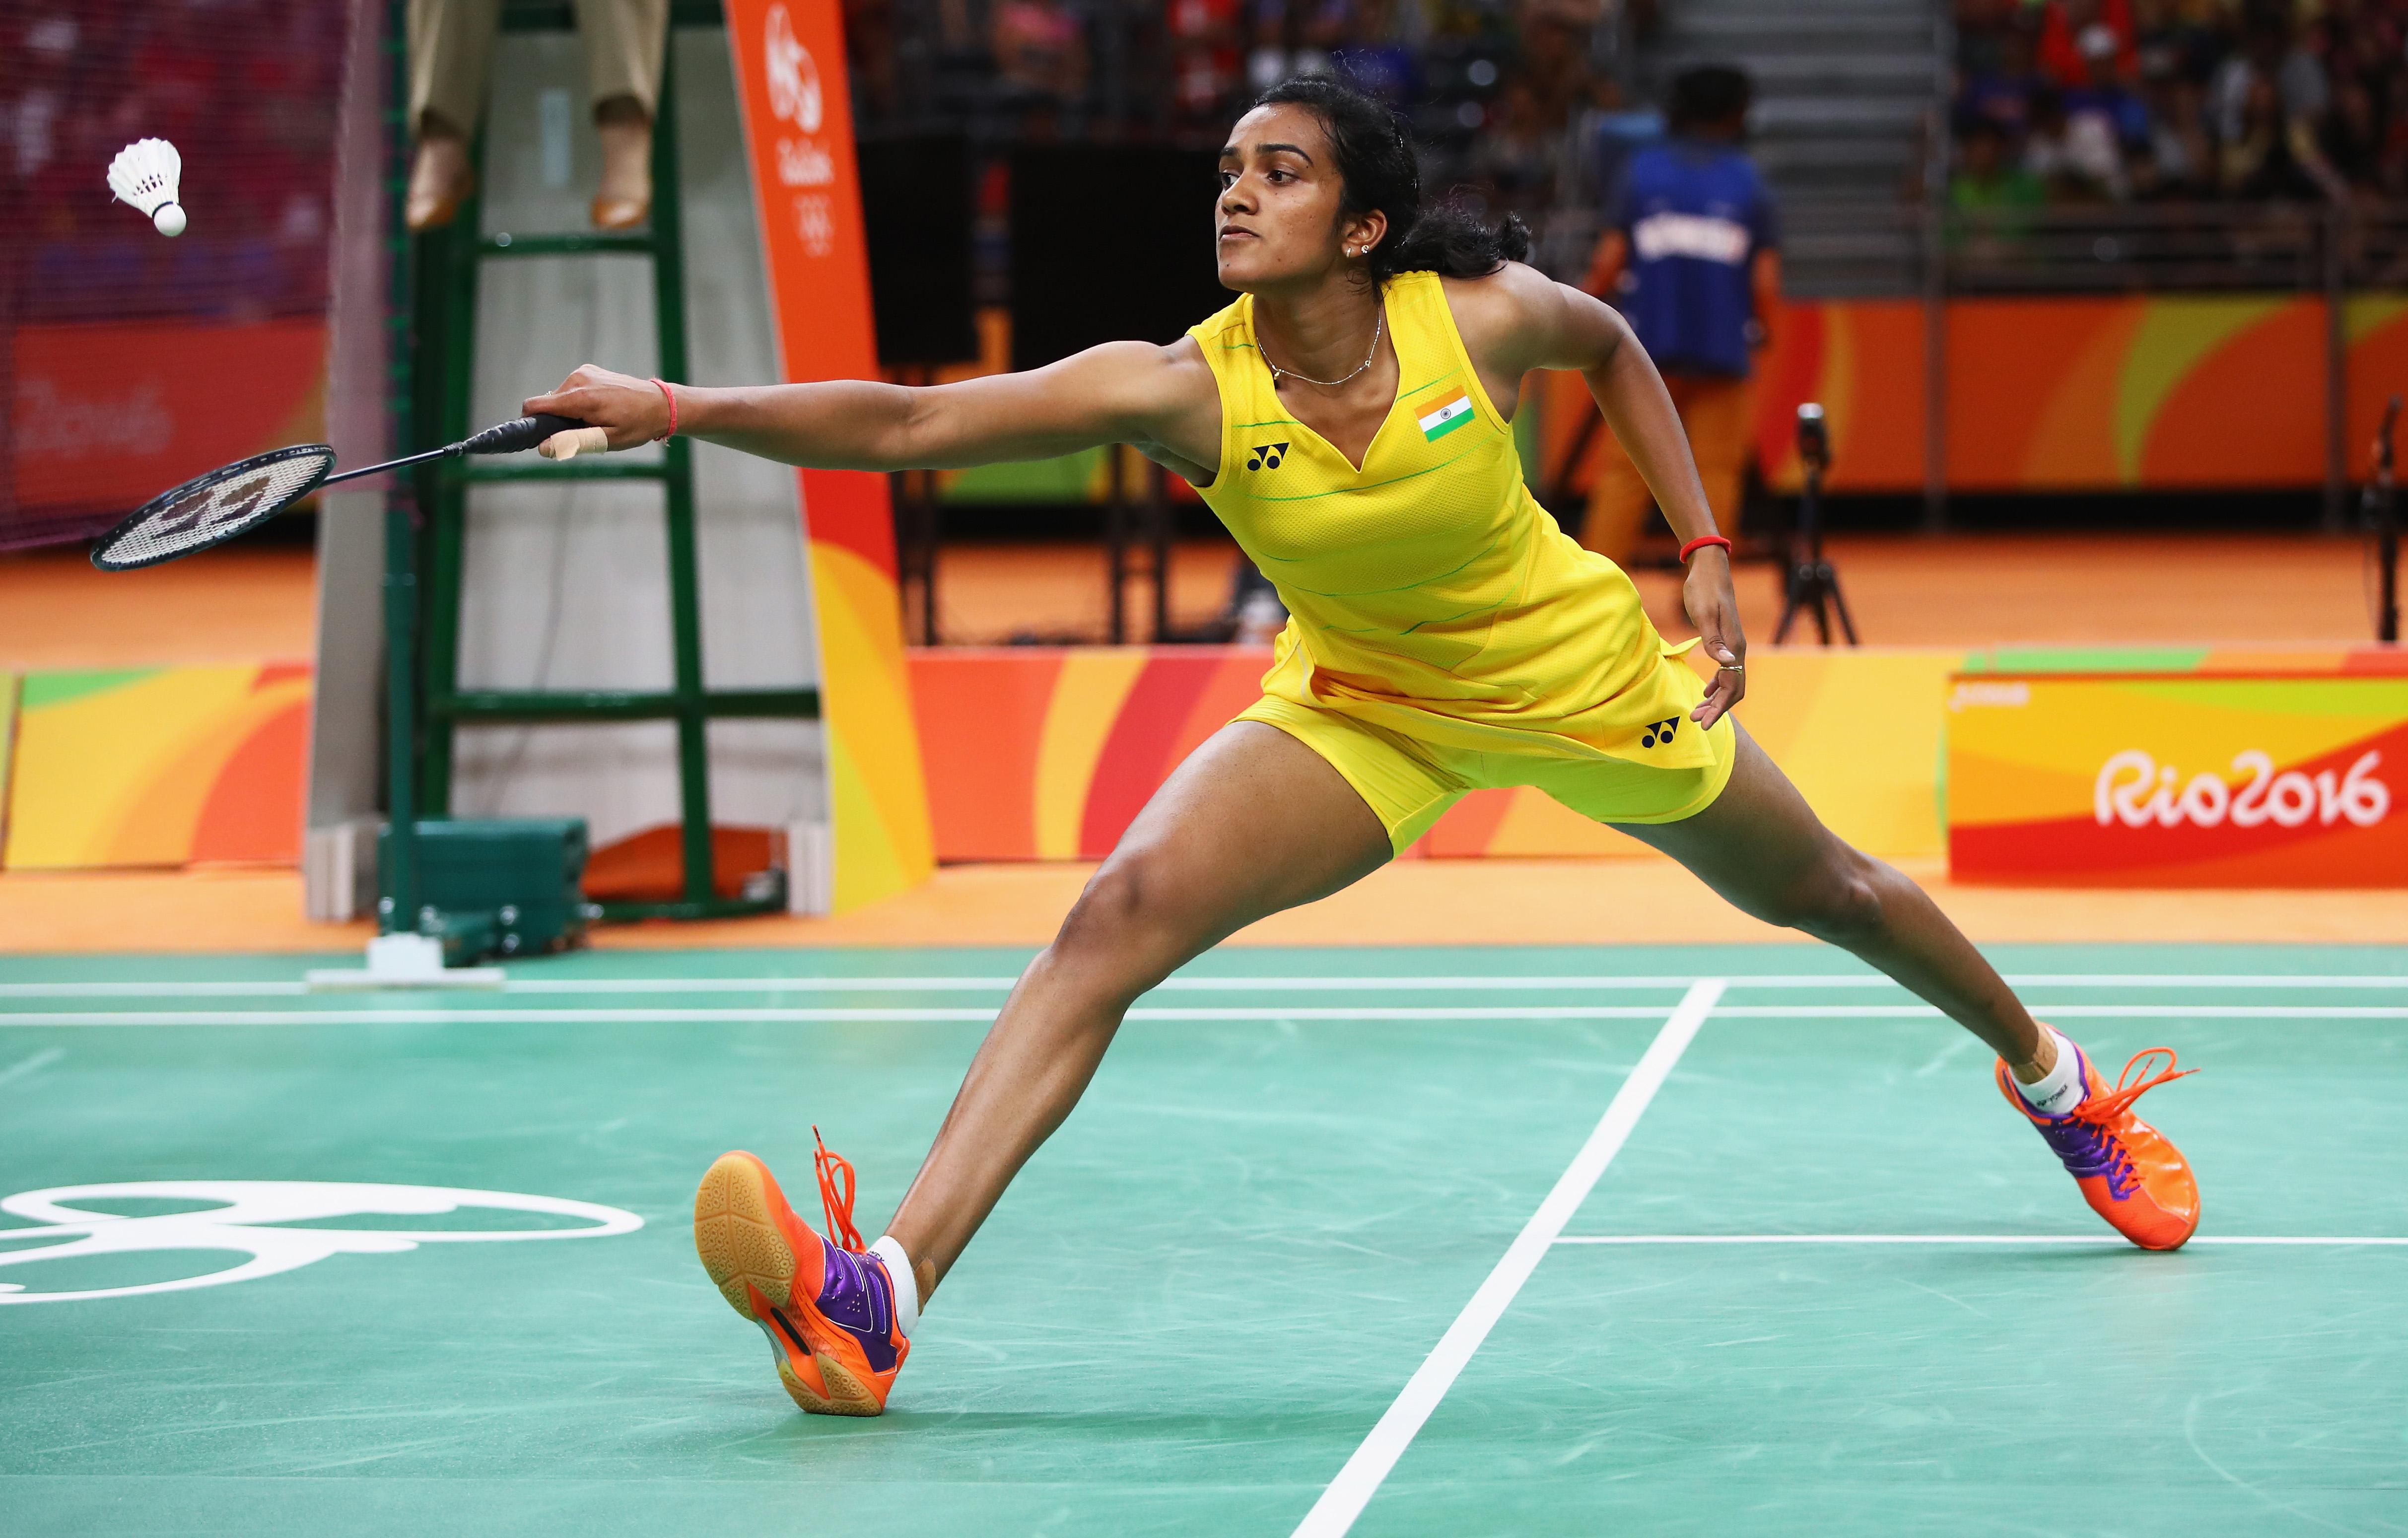 Wishes pour in for PV Sindhu as she wins first-ever gold for India at BWF World Championships